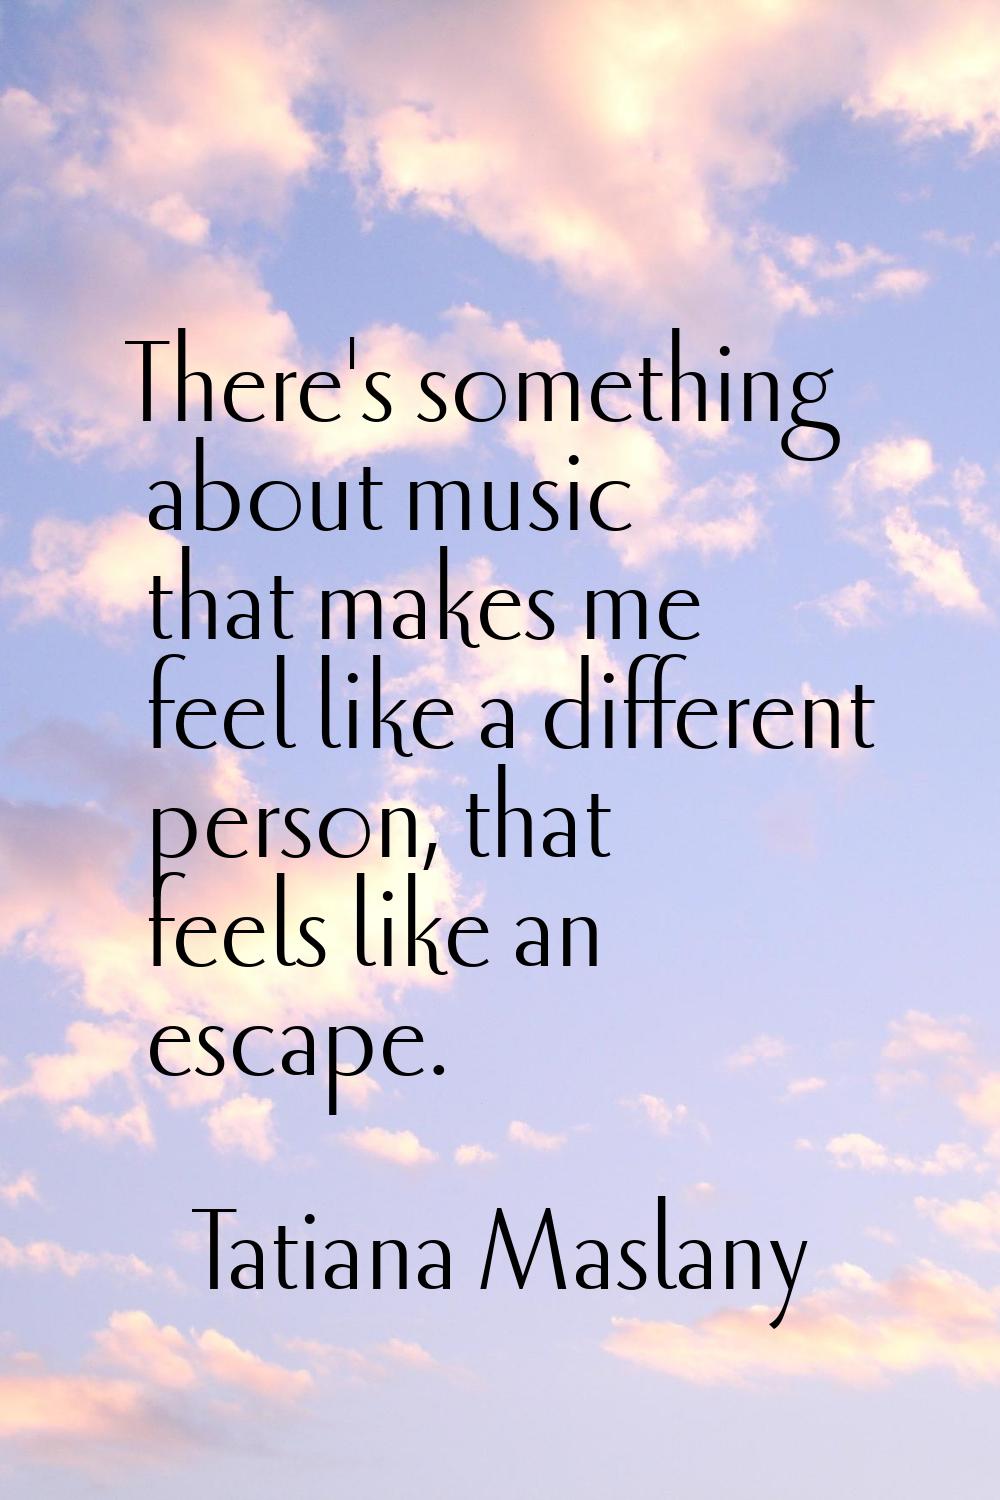 There's something about music that makes me feel like a different person, that feels like an escape